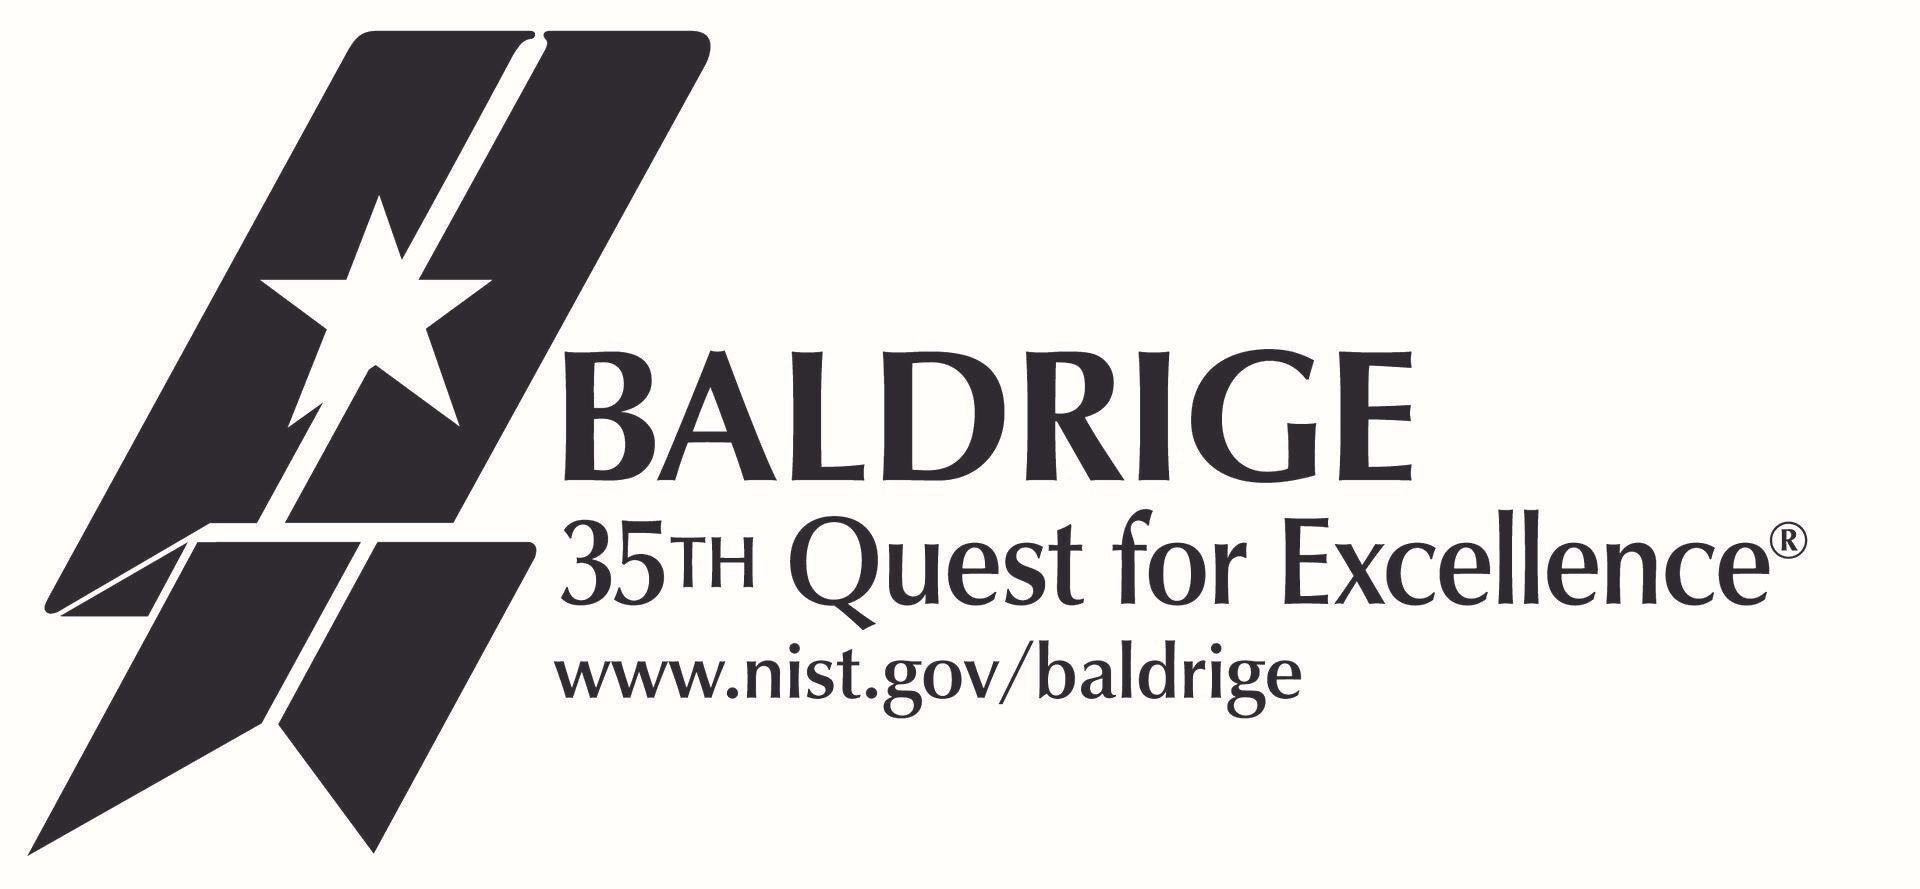 Save the Date for the 35th Quest for Excellence Conference April 710